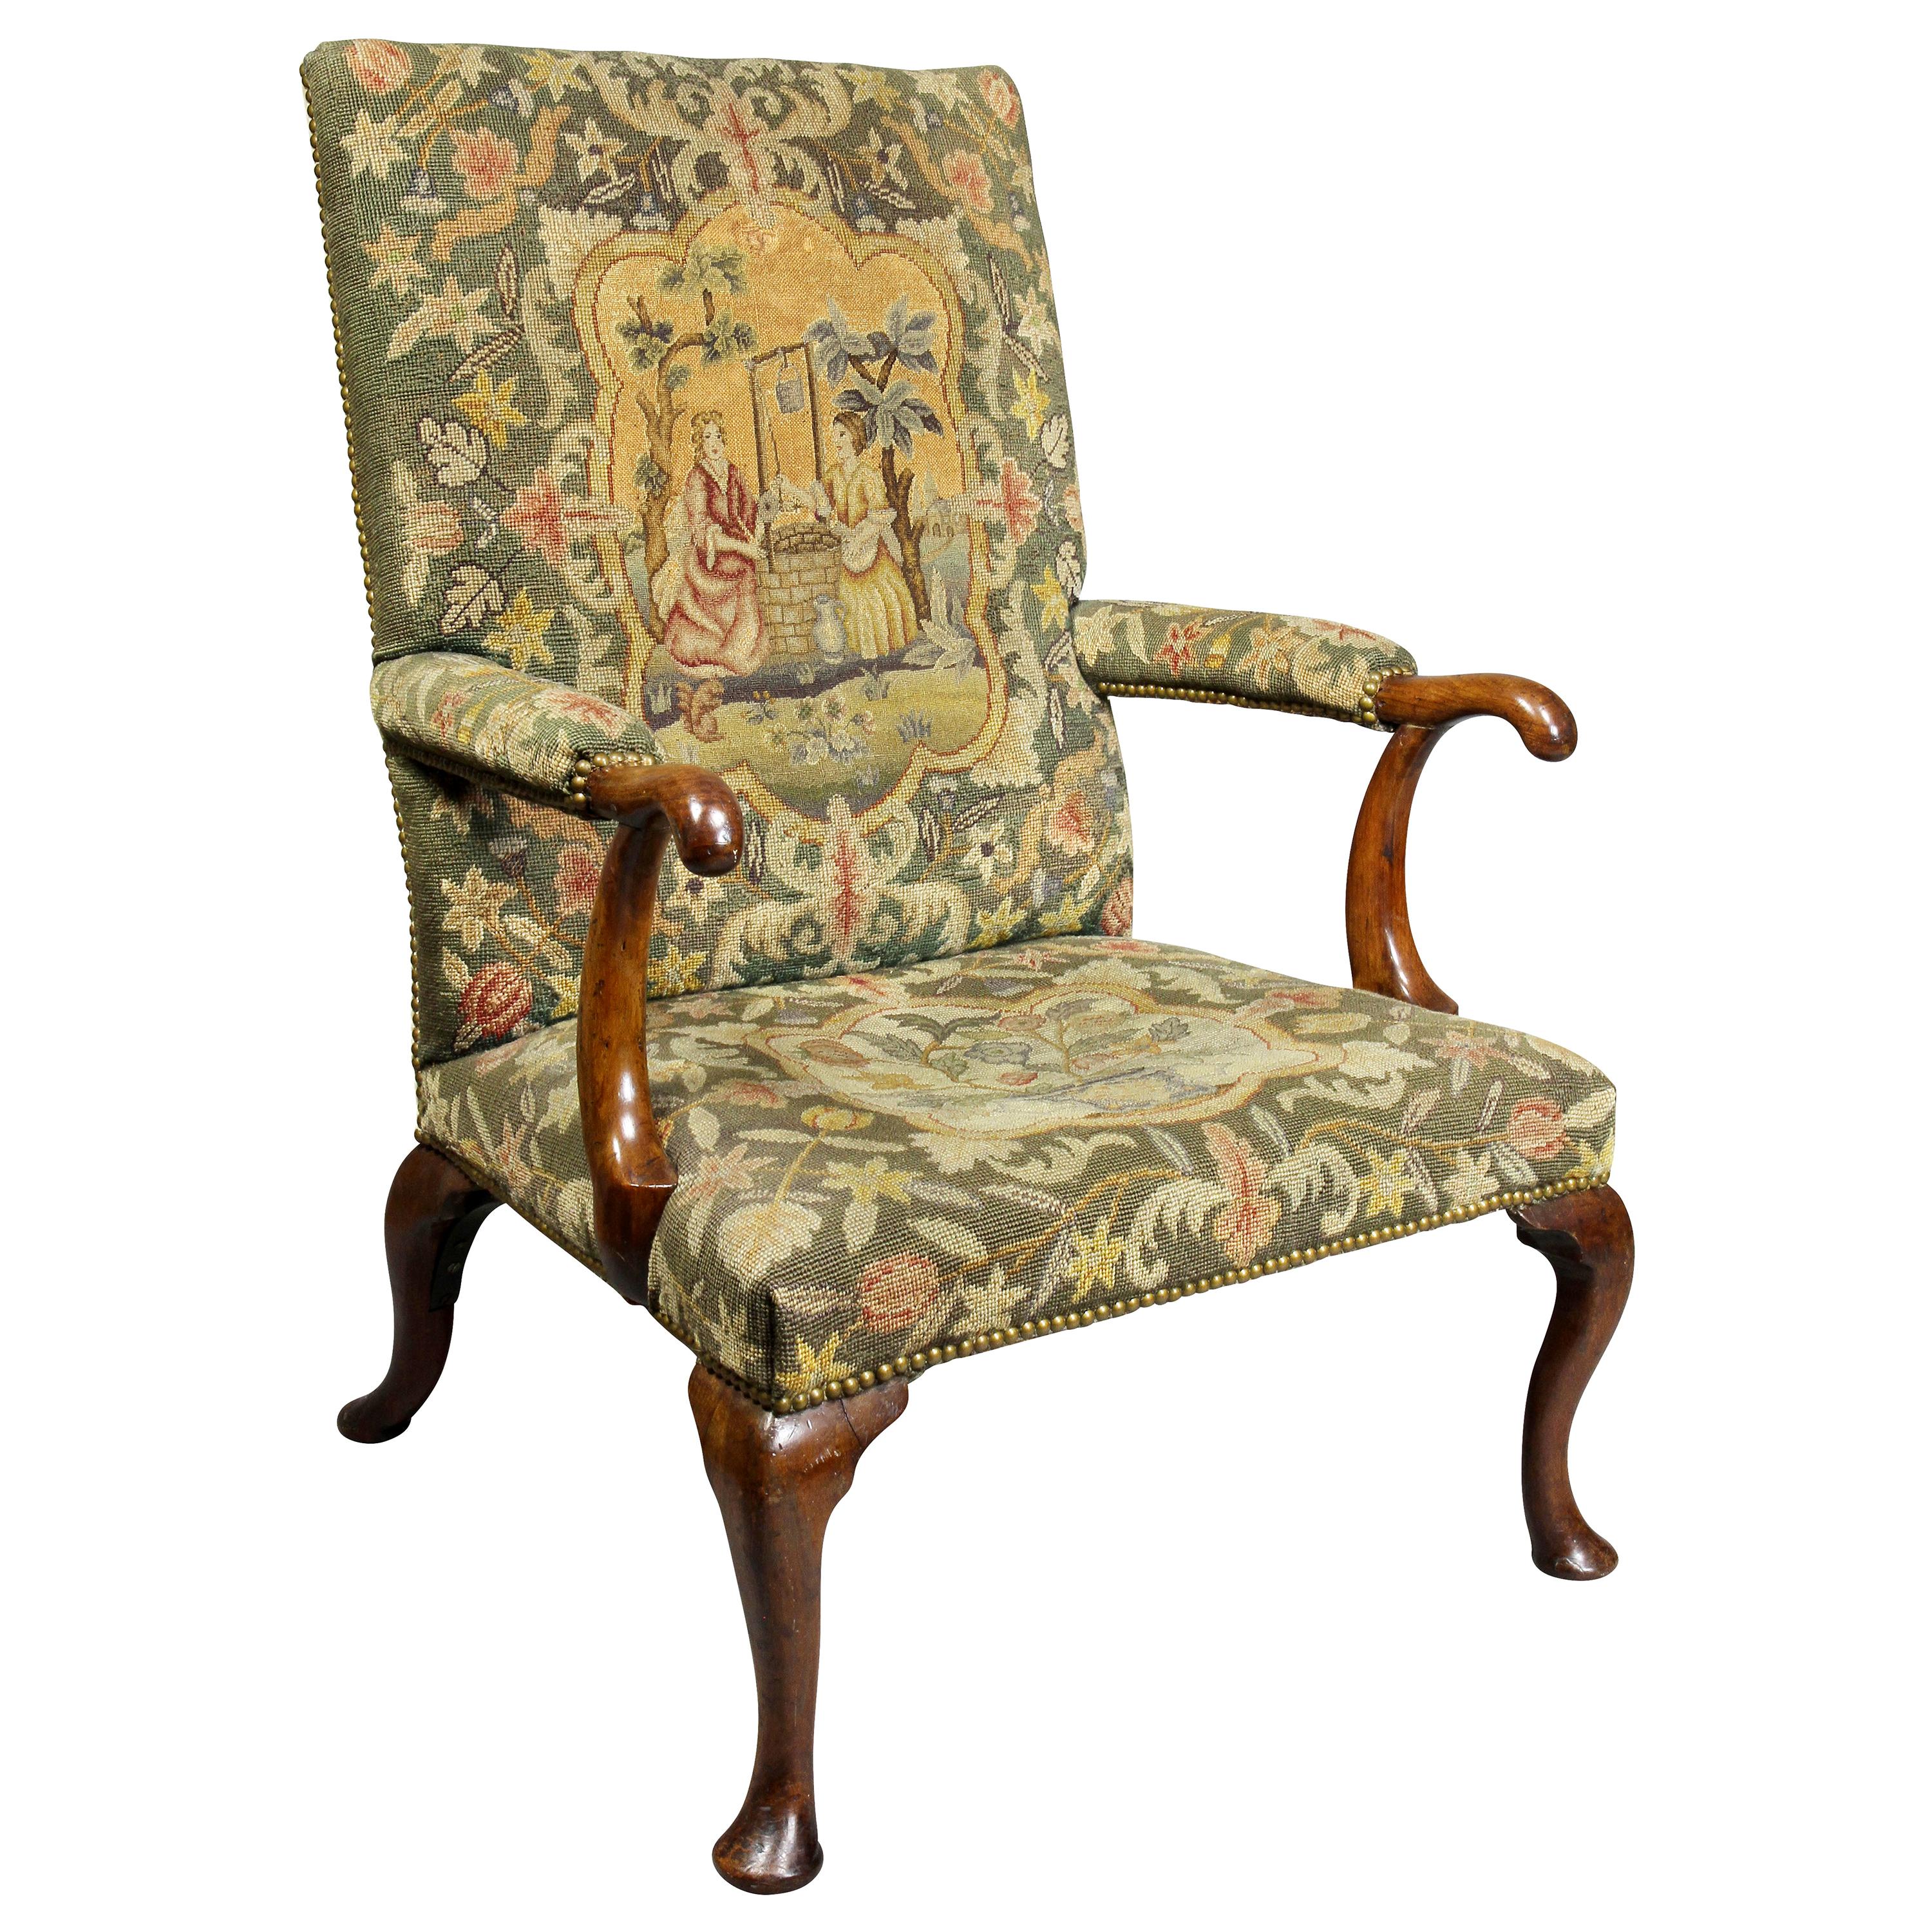 Queen Anne Walnut and Needlepoint Upholstered Armchair